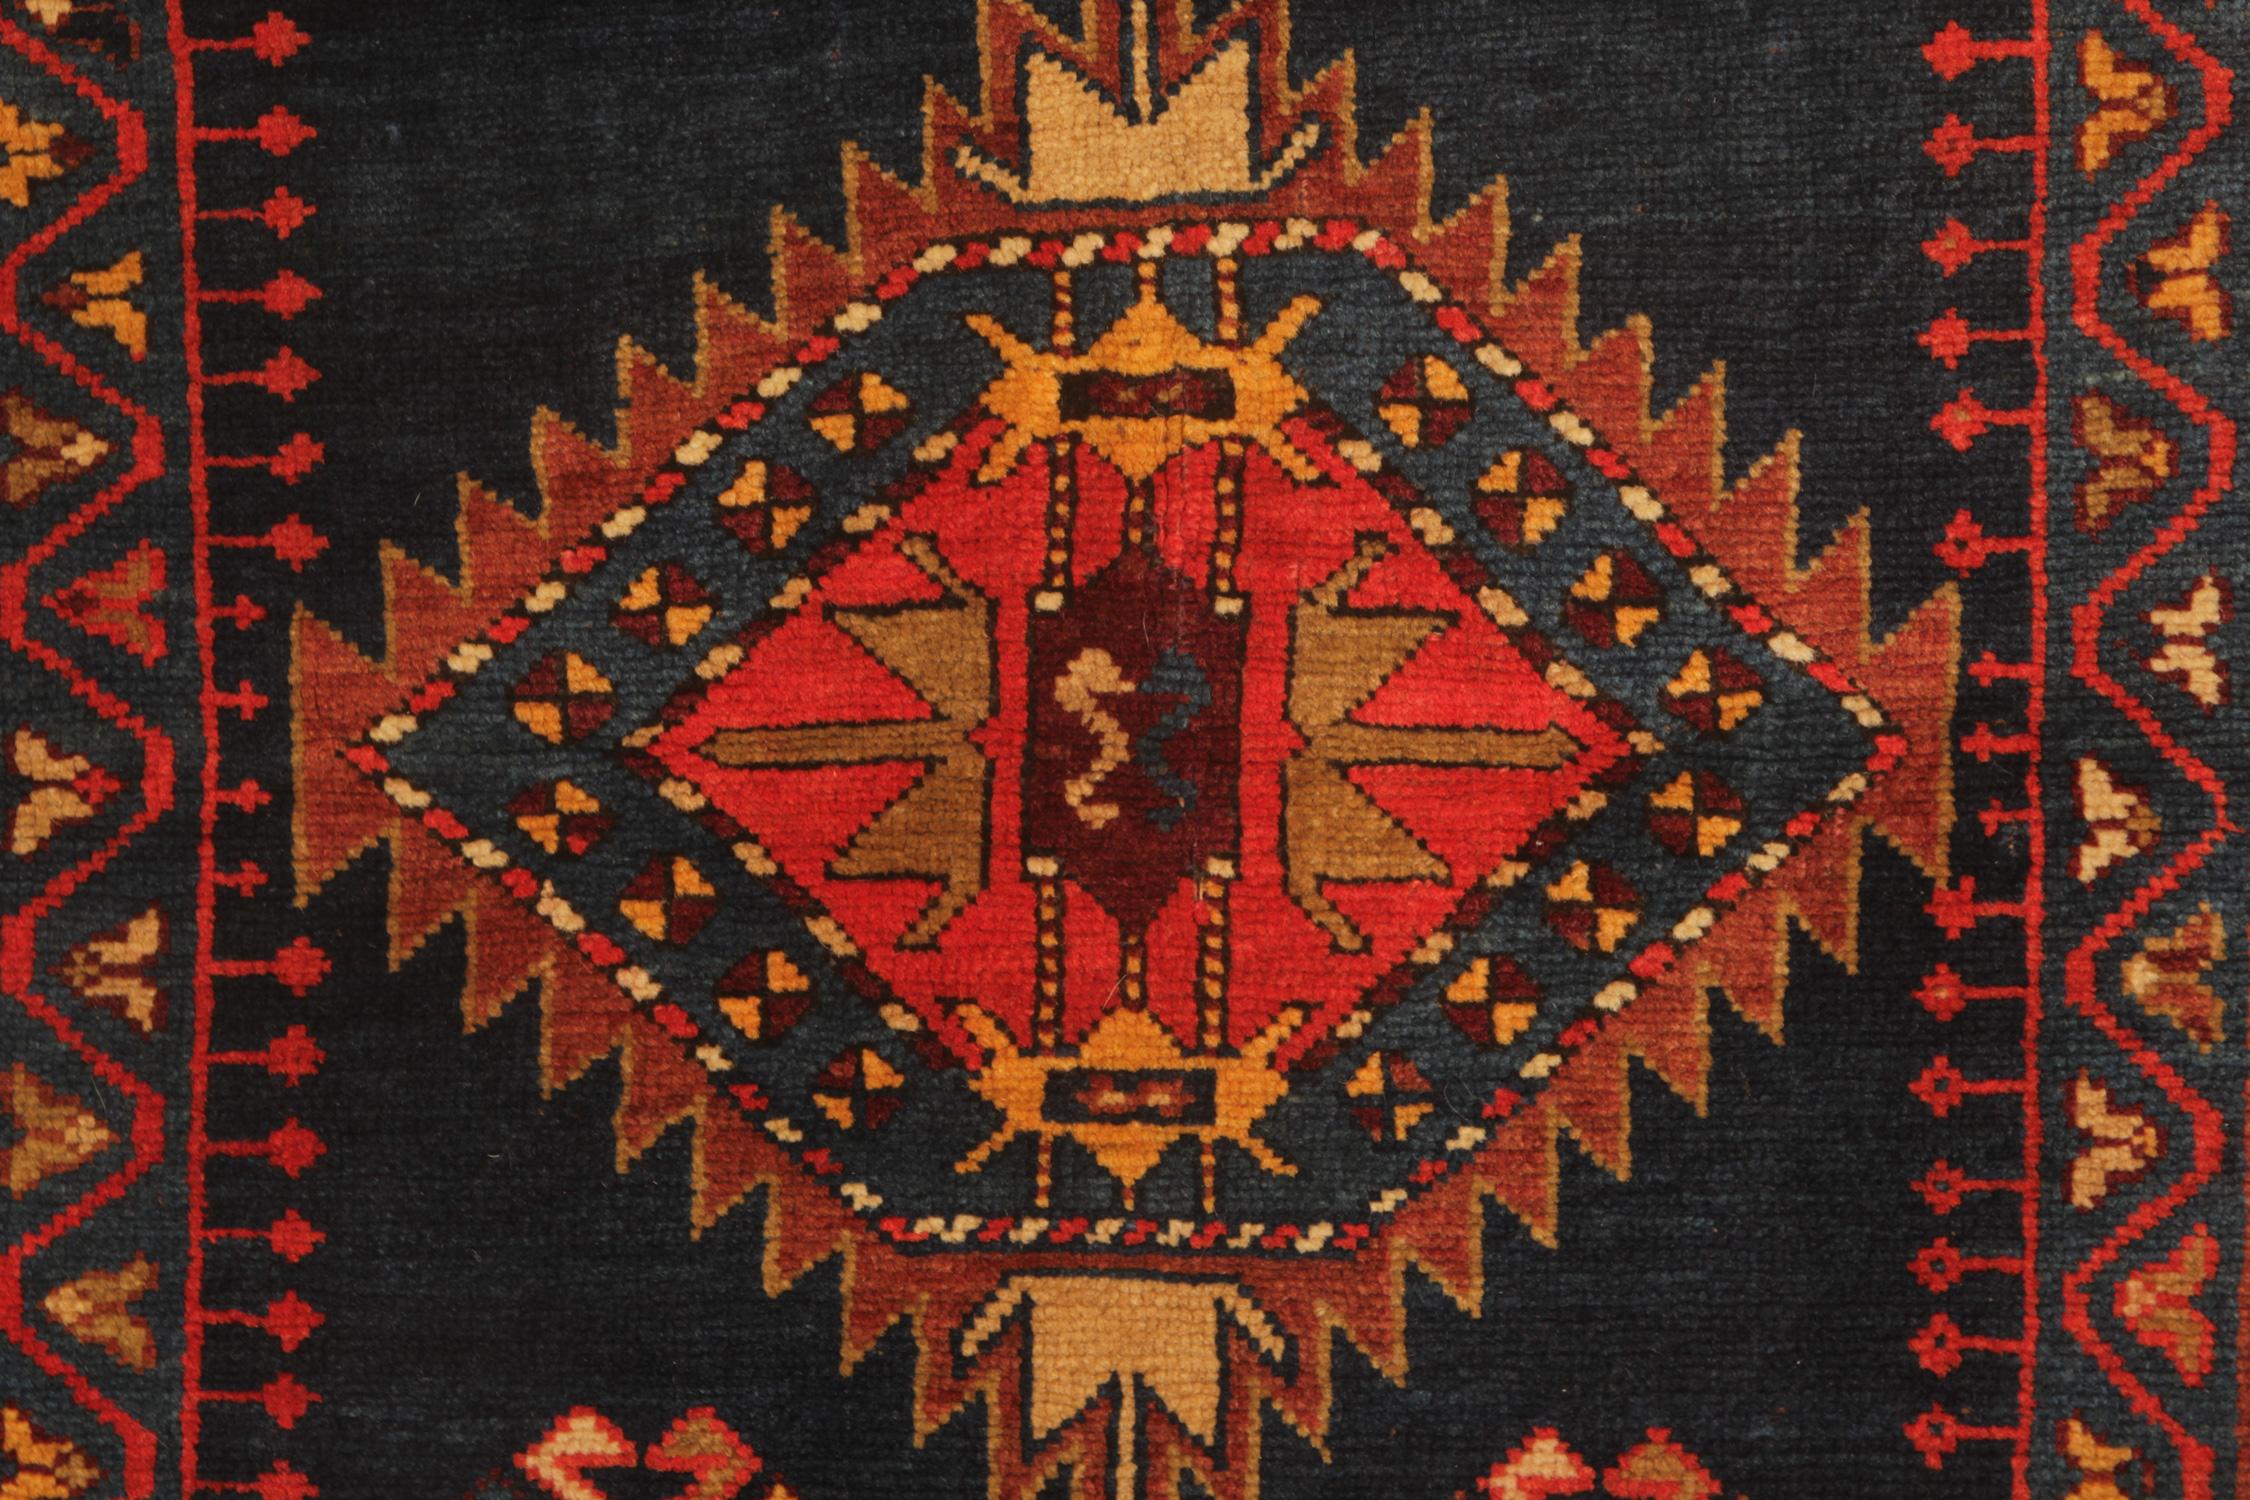 An excellent example of traditional Caucasian handmade carpet oriental rug weaving from the Kazak region. These Medallion ground design patterned rugs can be the best element of home decor objects to give warmth to the environment, because this